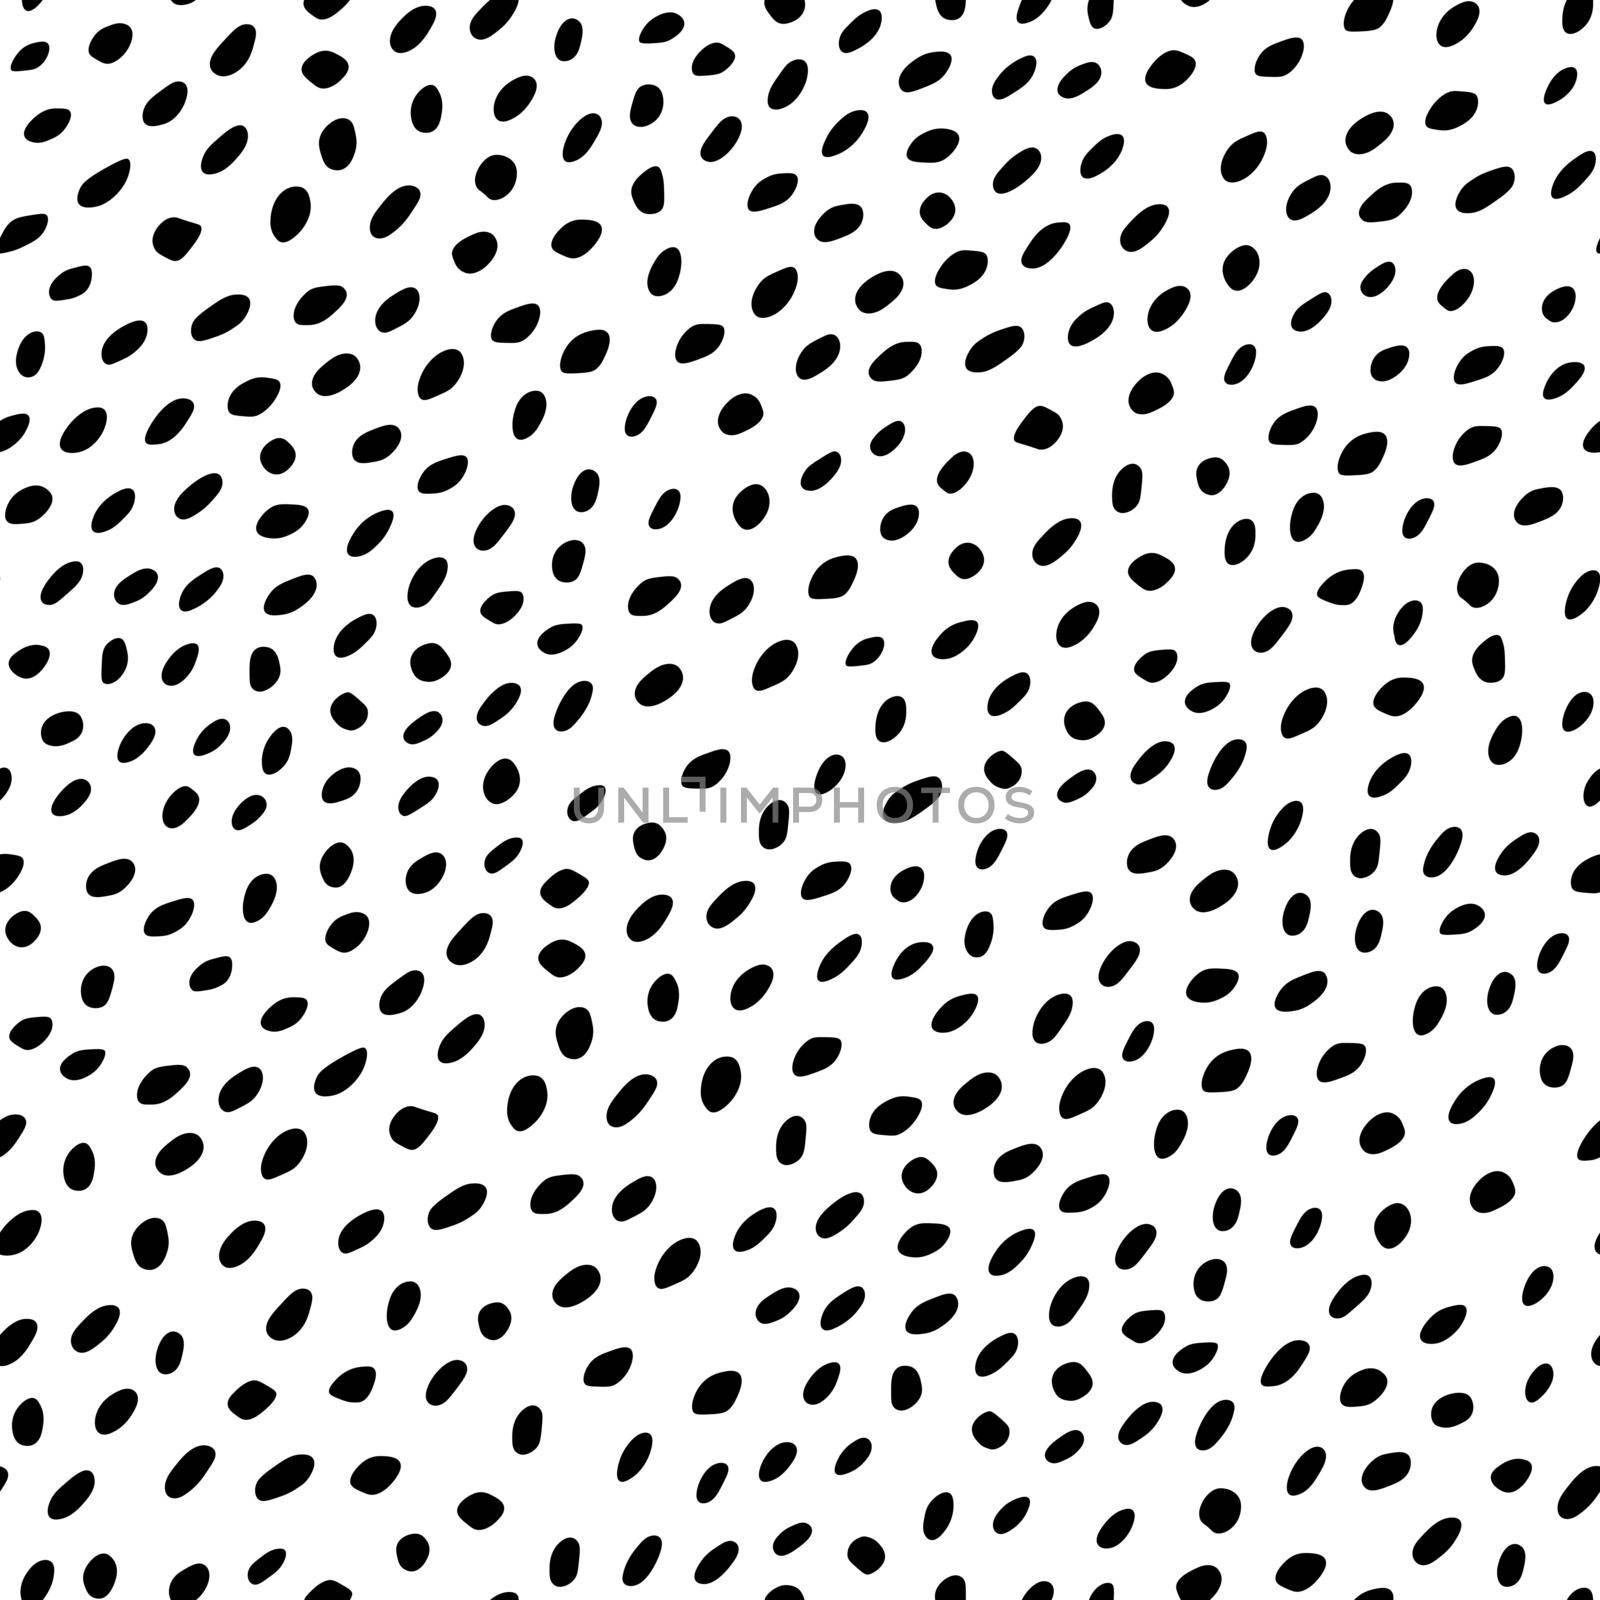 Abstract black and white background. Seamless pattern with animals print for wallpaper, web page, textures, card, postcard, faric, textile. Ornament of stylized skin. Decorative vector illustration. by allaku